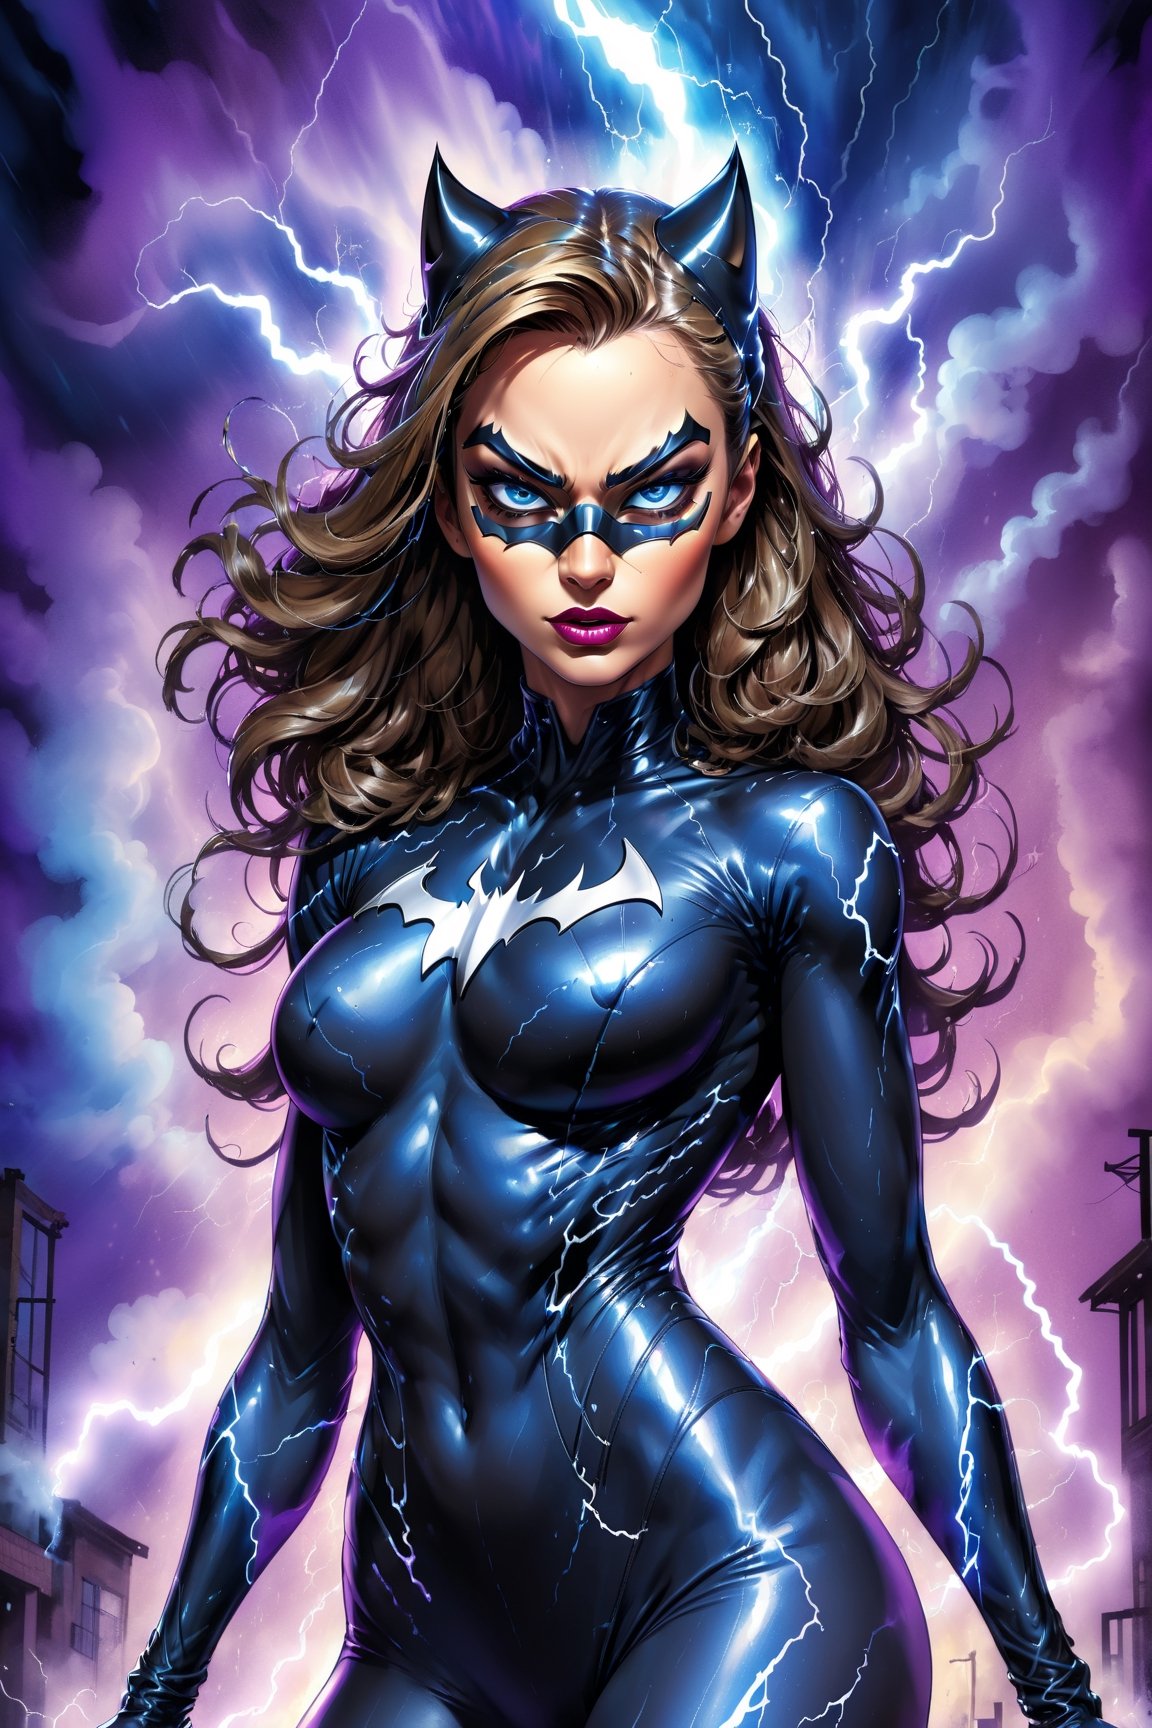 4K UHD illustration,  upscaled professional drawing HDR,  from DC comics in dynamic pose, full body image (:1.8) stunningly beautiful woman, intense blue eyes,  eyebrows tanned skin tone, detailed catwoman mask, gloss black form fitting full length bodysuit,  full lips, lips parted looking-into-camera, glowing lightning in background, swirling smoke eminating from fingertips, abandoned alley background, detailed night time, thunderstorm atmosphere, glowing blue eyes emitting eeire spectral glow, purple lightning thunderstorm in background, 300dpi, masterpiece style, painting style, stroke style in a dark background,watercolor, charcoal, pen & Ink, tshirt design style, aesthetic for Tshirt design, darktone,Leonardo Style